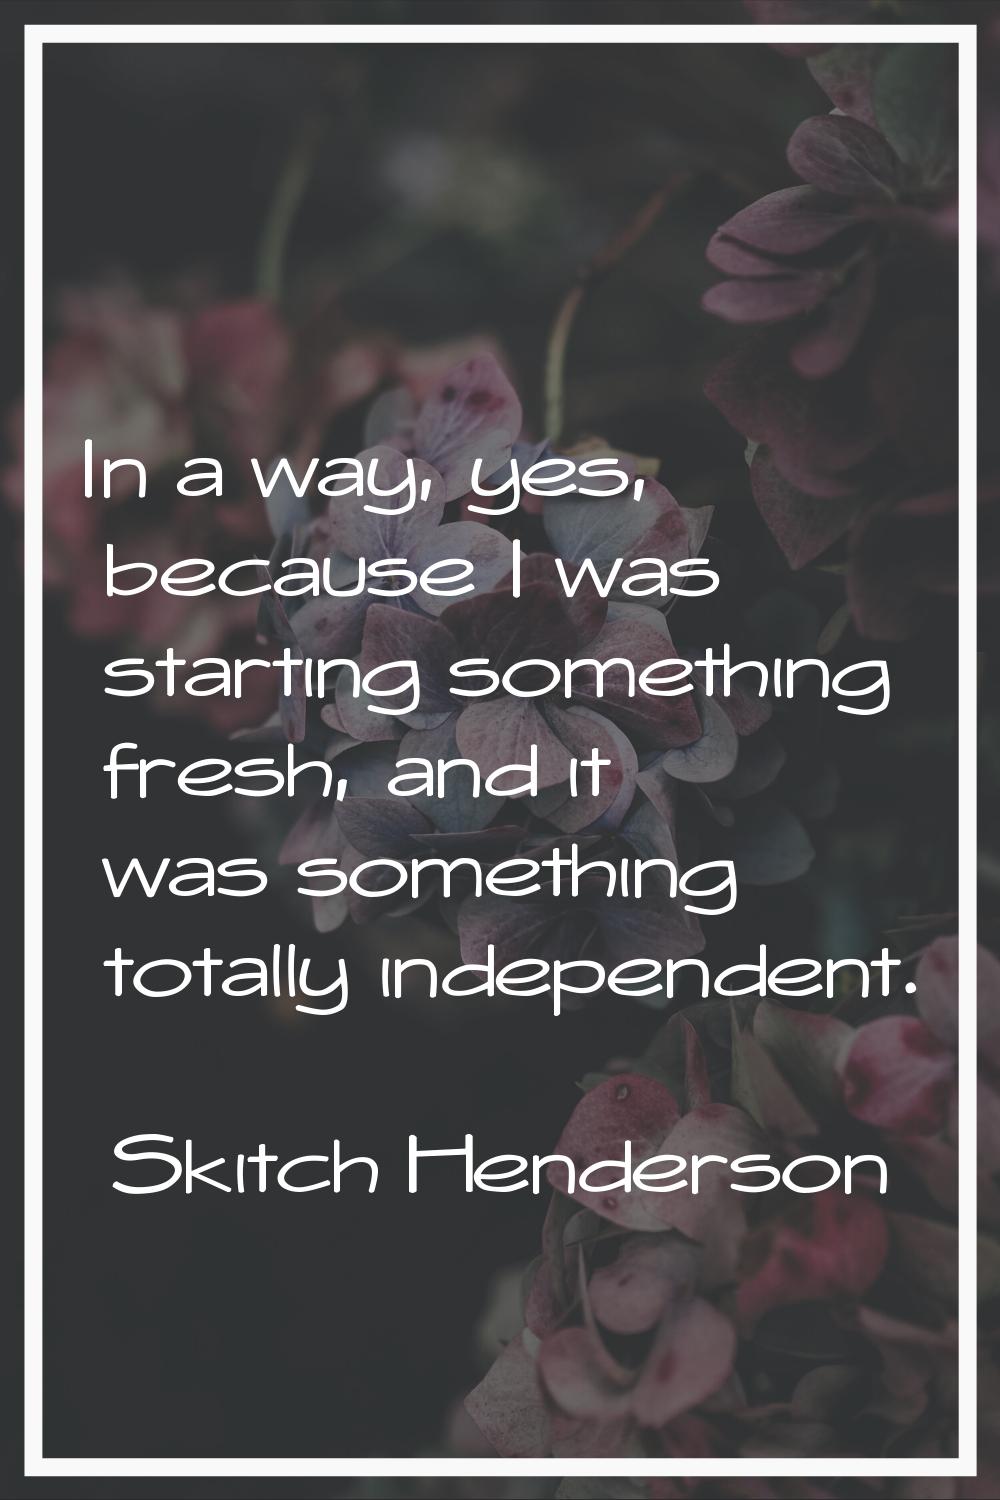 In a way, yes, because I was starting something fresh, and it was something totally independent.